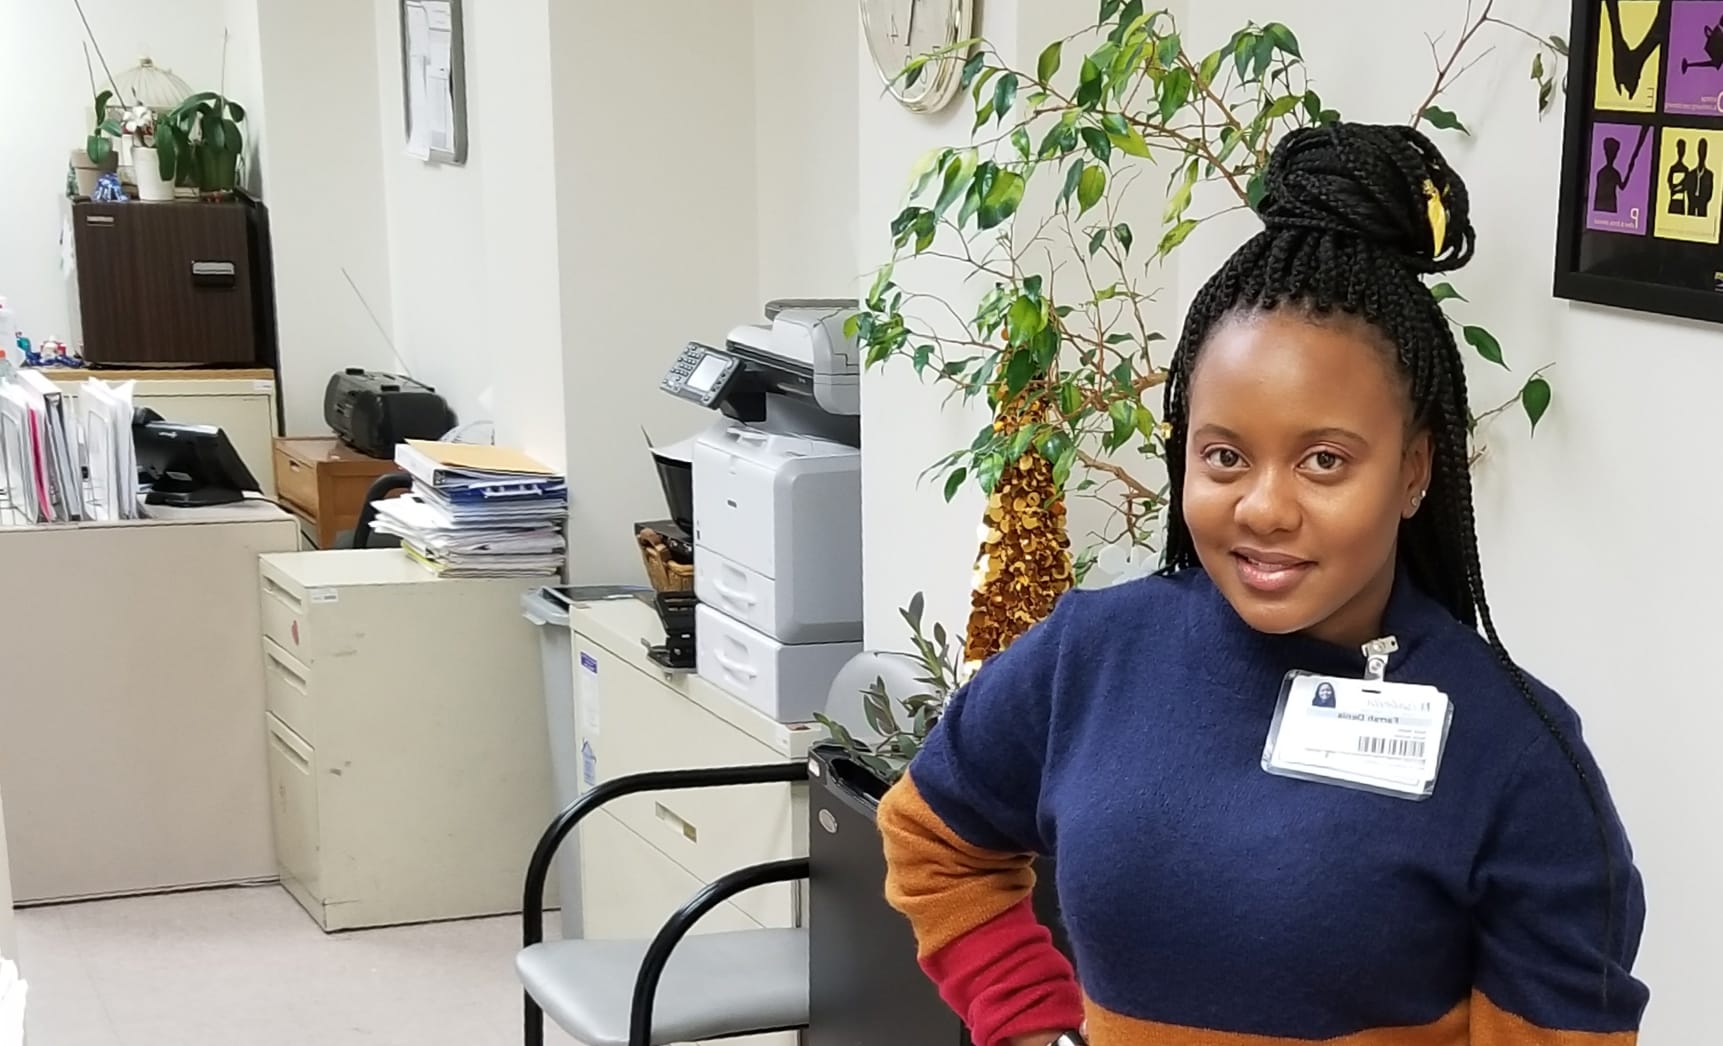 “I try to give myself over to the residents, especially those that don’t have family or have family that don’t visit often,” said GSSW alumnus Farrah Denis, a medical social worker at the Isabella Geriatric Center in Manhattan.